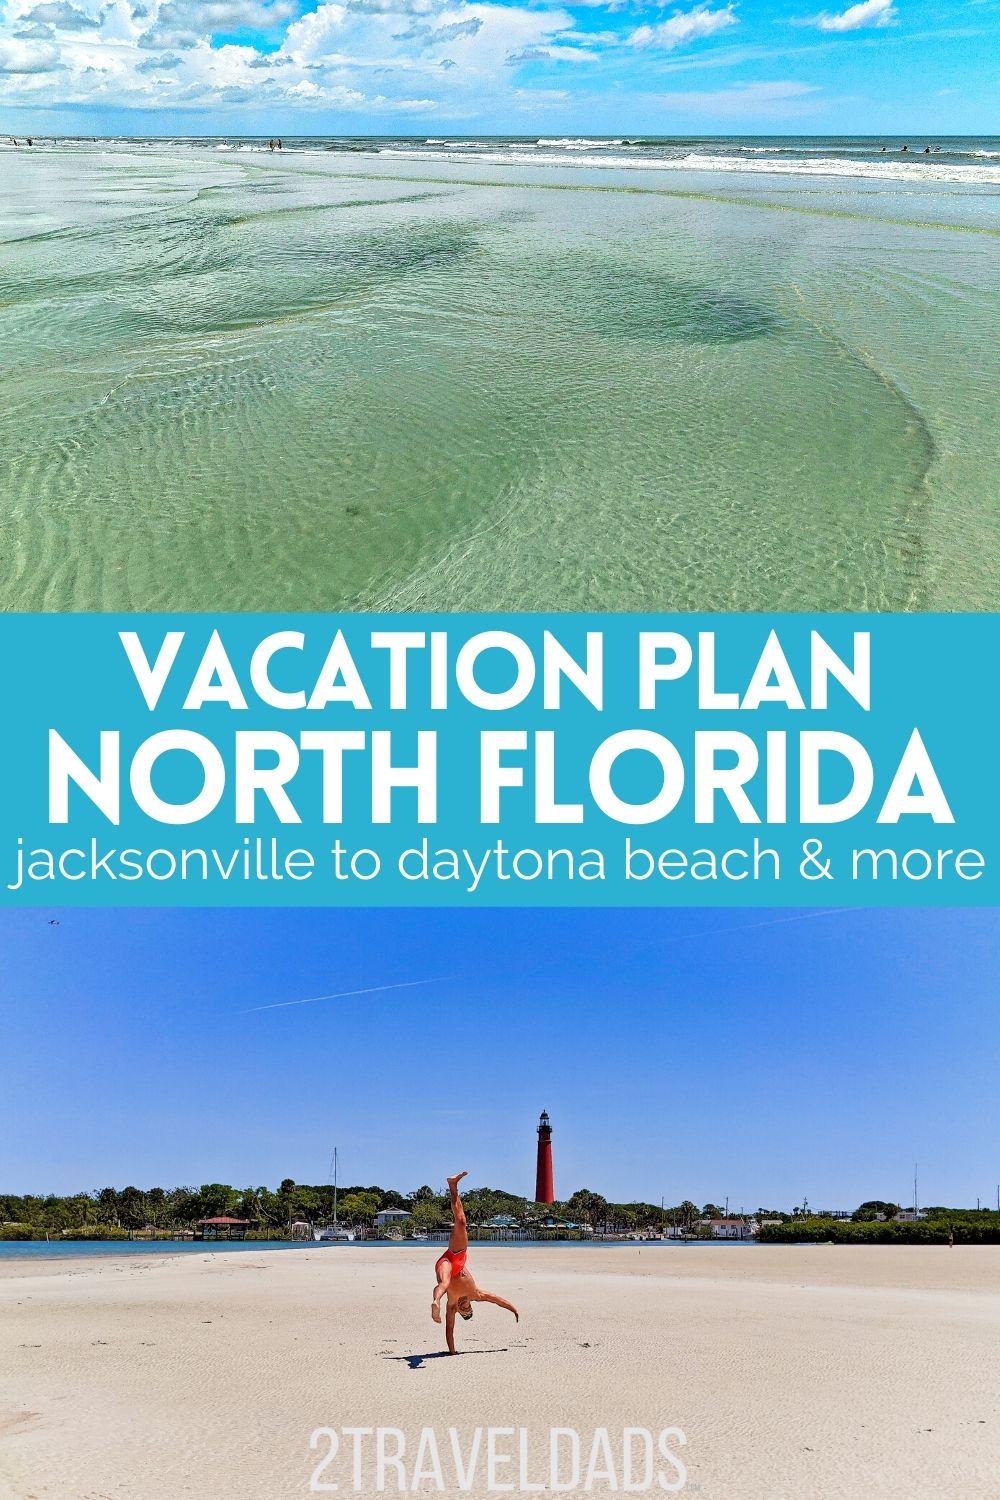 This North Florida vacation plan is ideal for enjoying the best of Daytona, Jacksonville and America's oldest city: St Augustine. Best beaches to visit, historic sites, and easy natural areas to enjoy on your Florida trip.